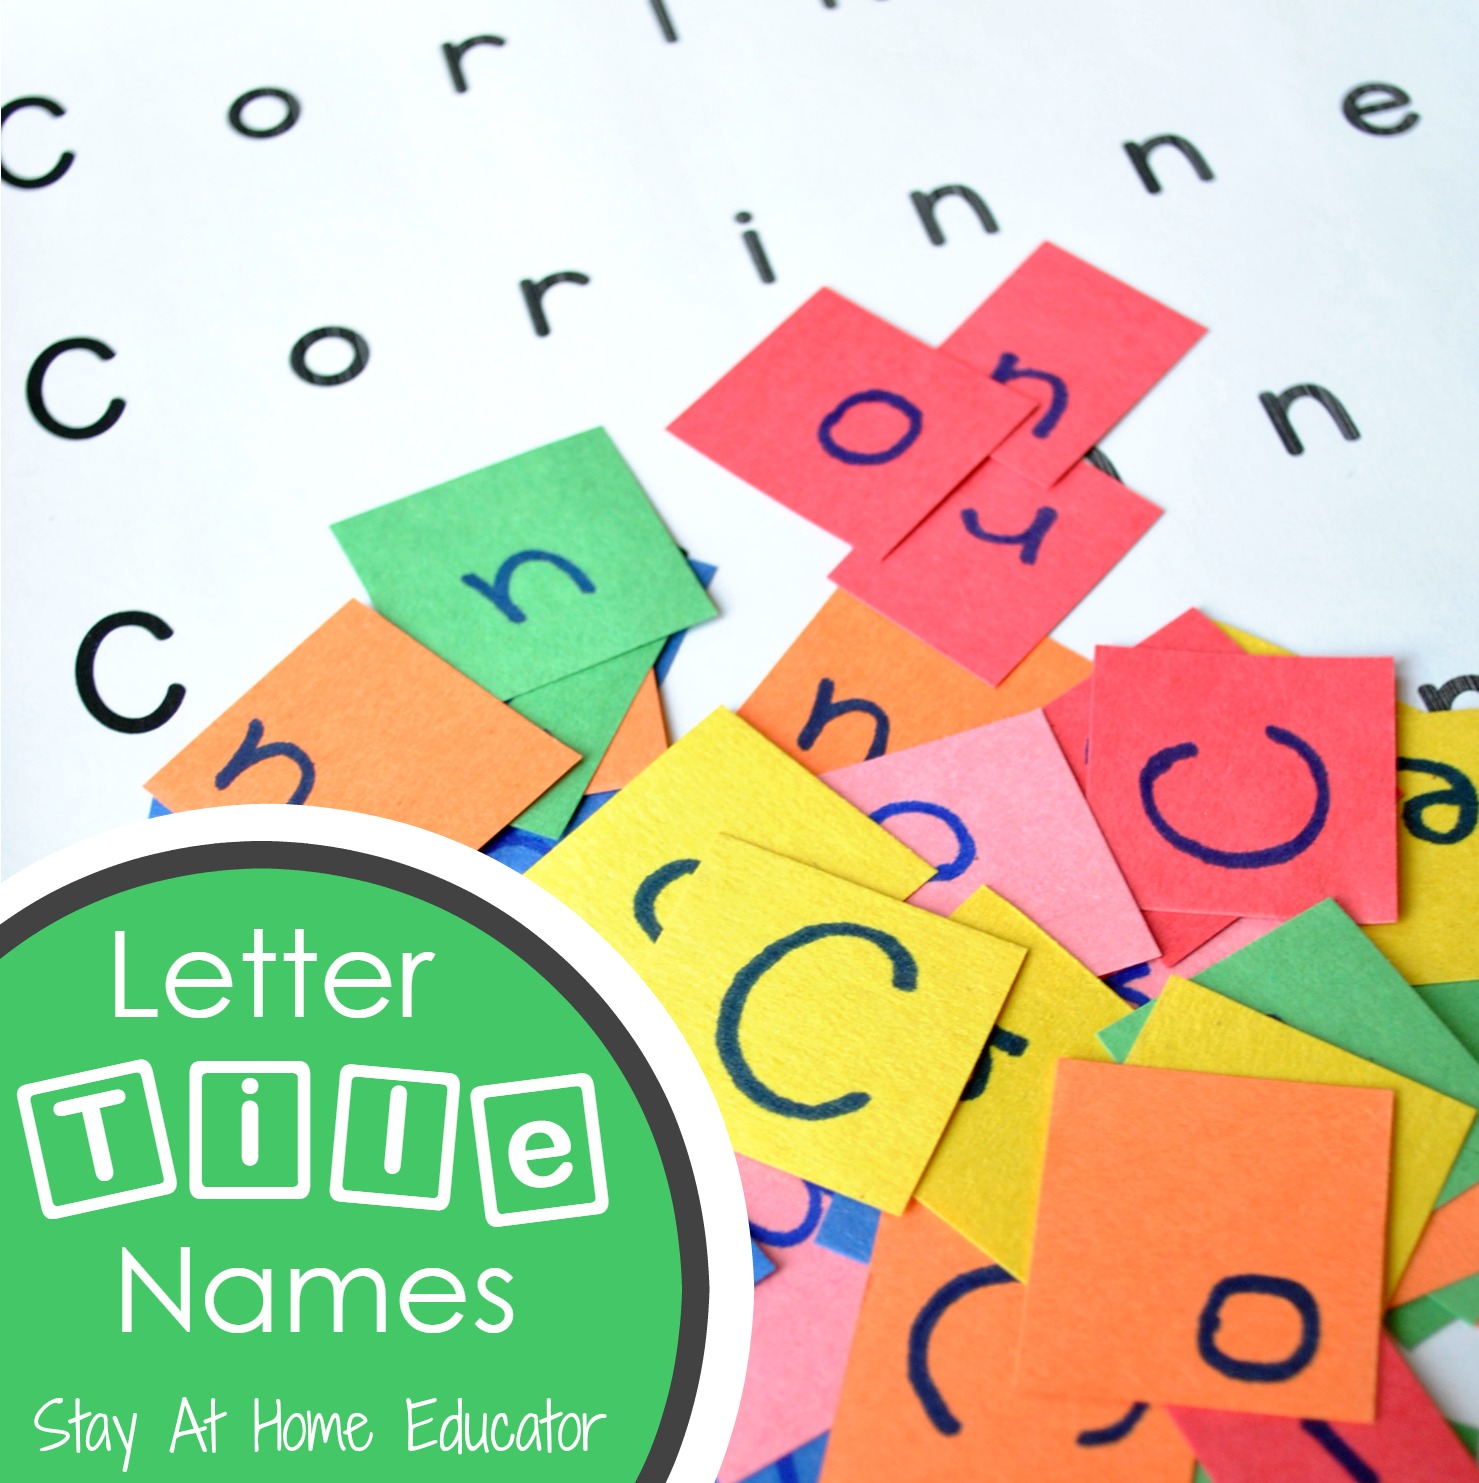 Letter Tile Names - Stay At Home Educator